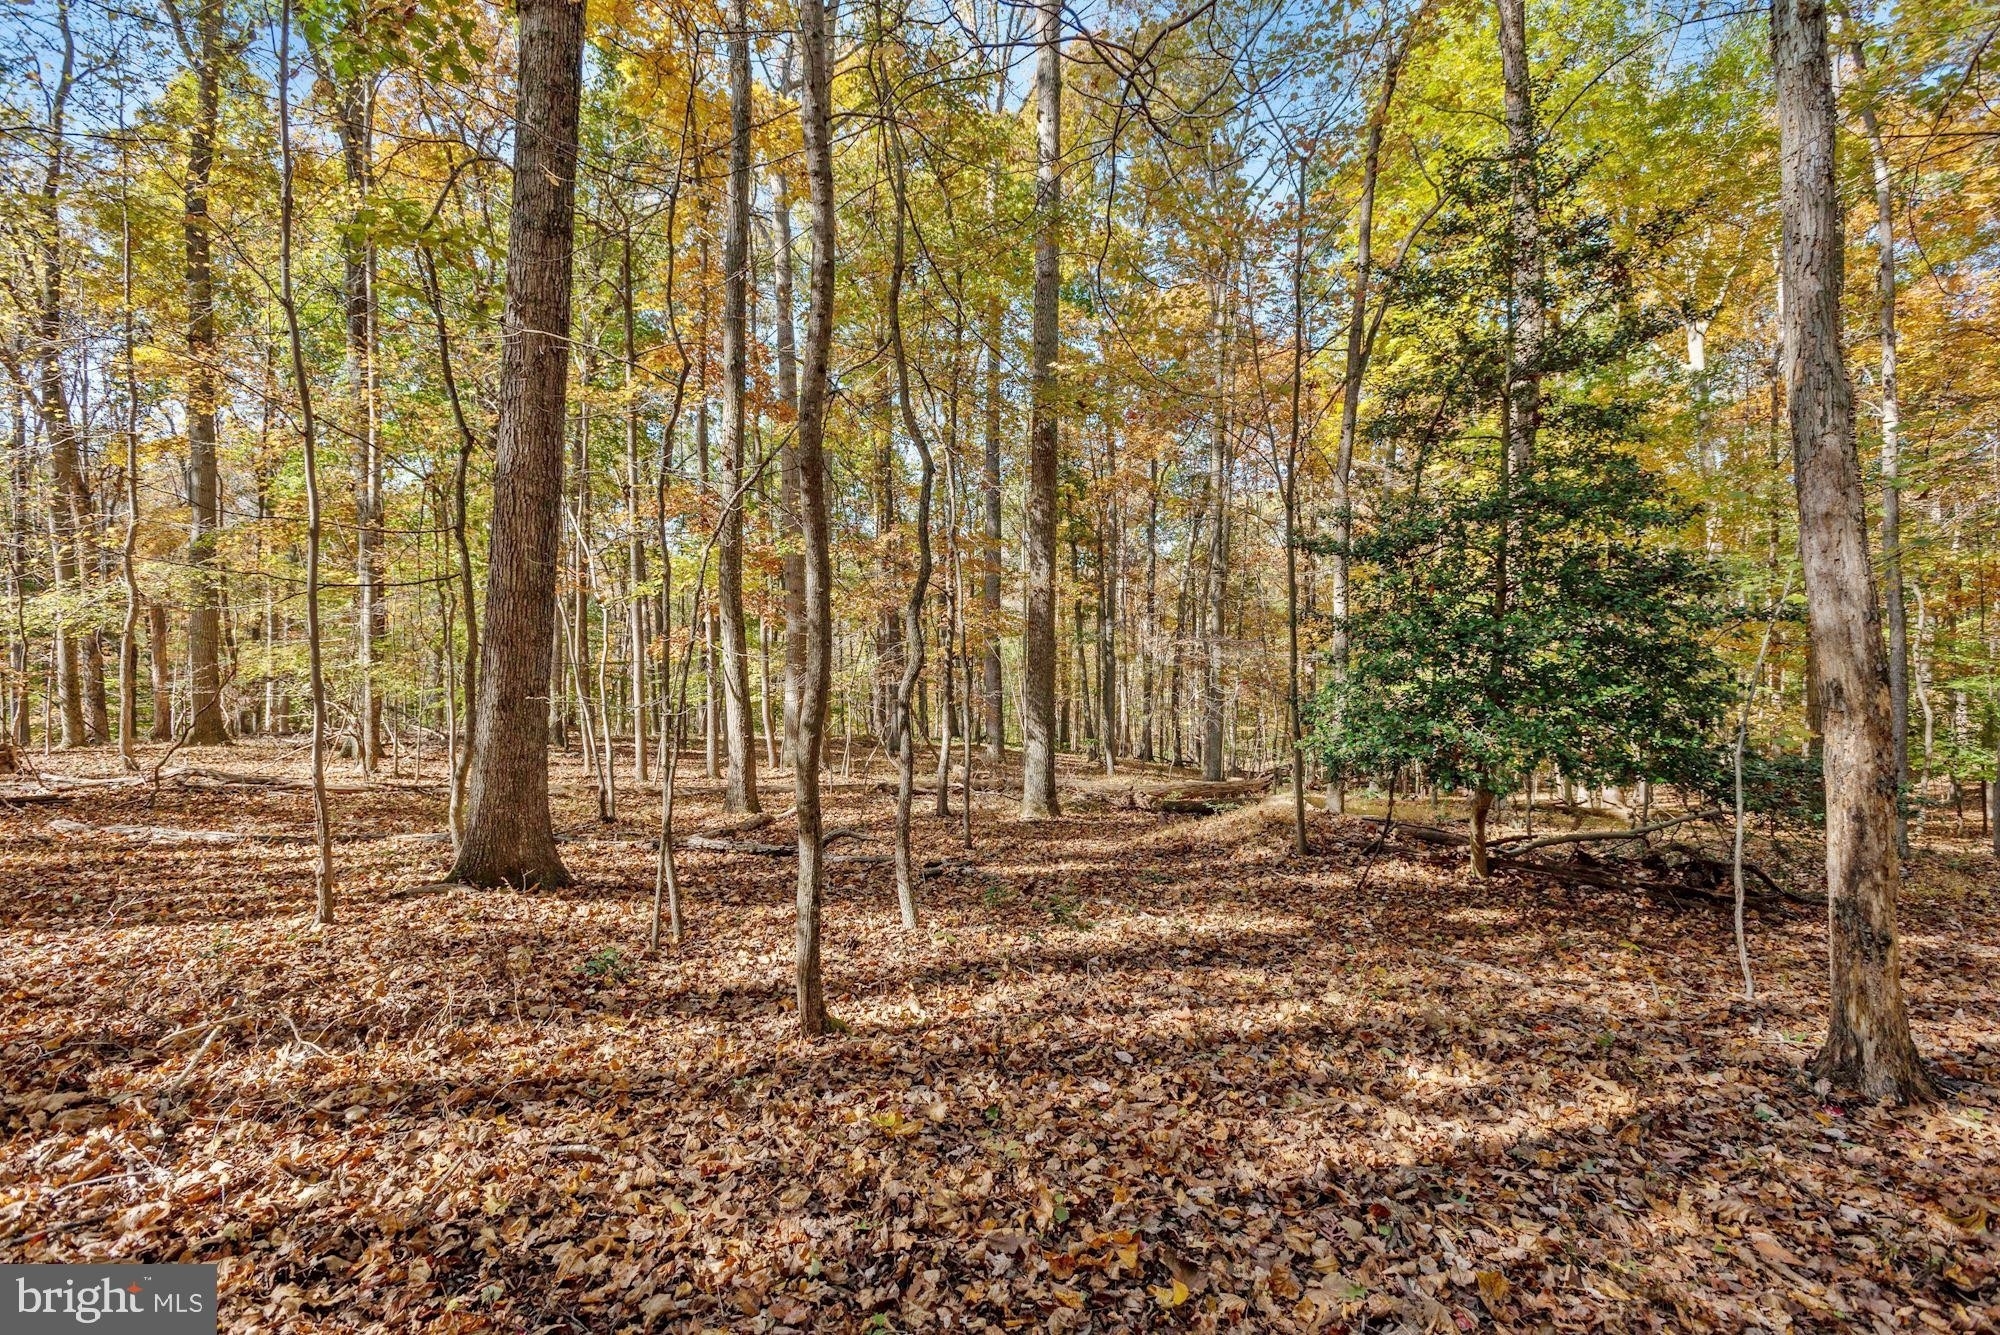 4. Land for Sale at Great Falls, VA 22066